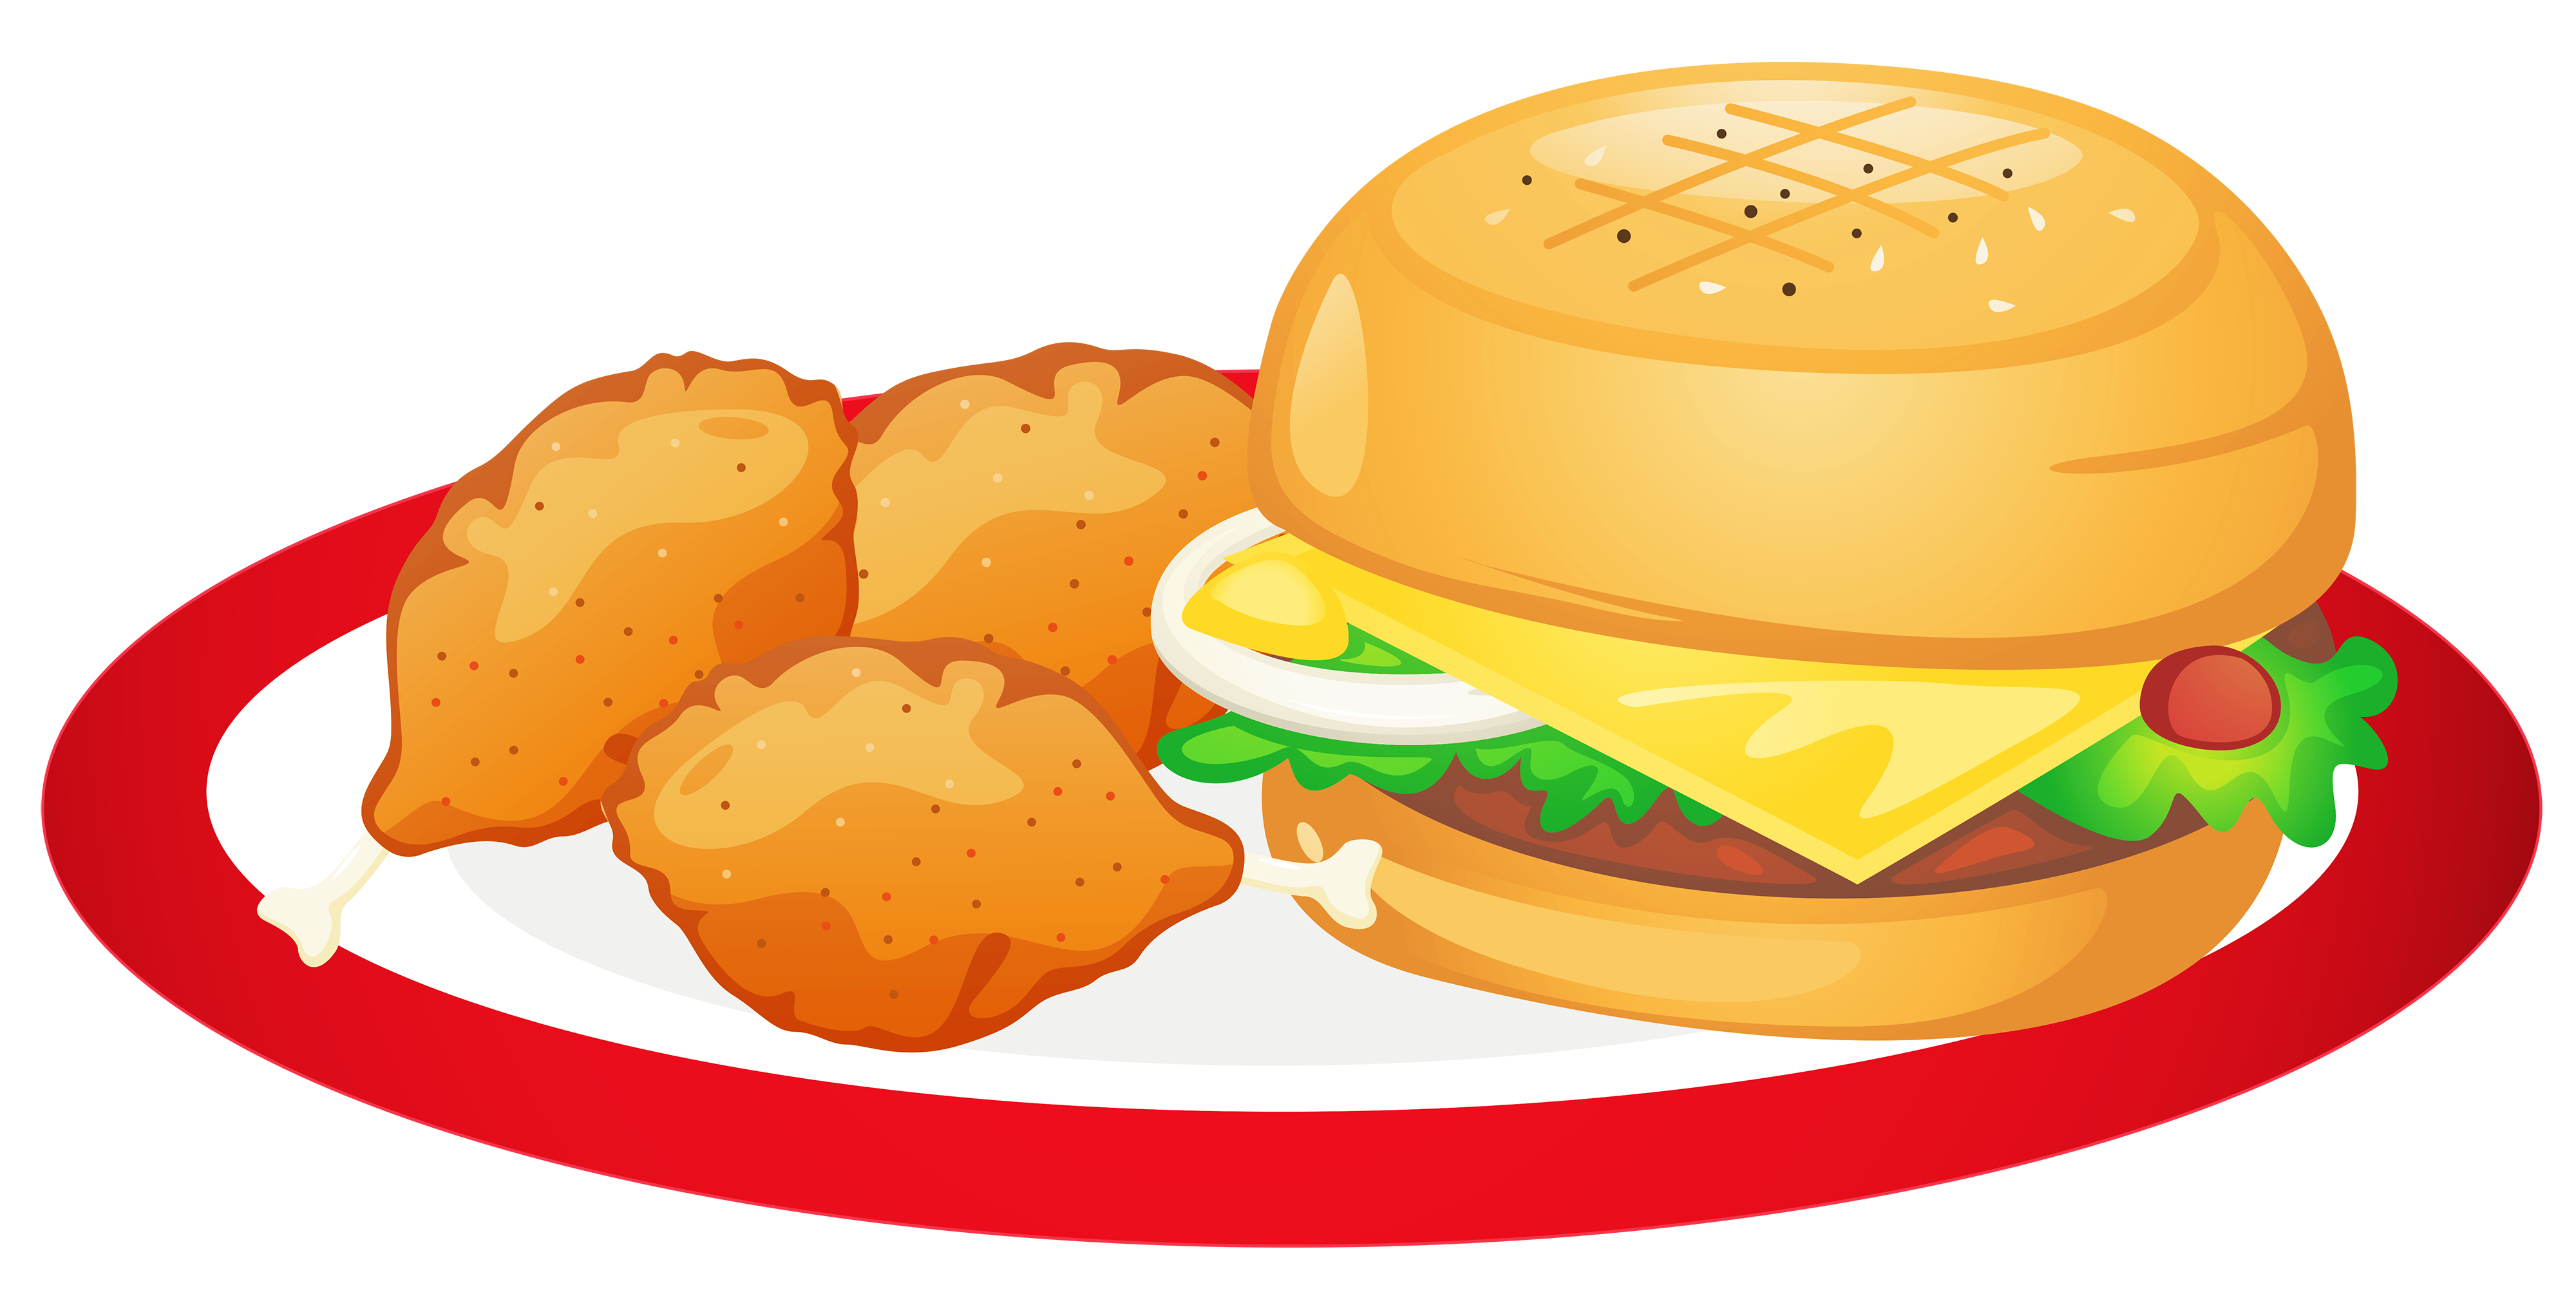 Free Food Clipart Transparent, Download Free Food Clipart Transparent